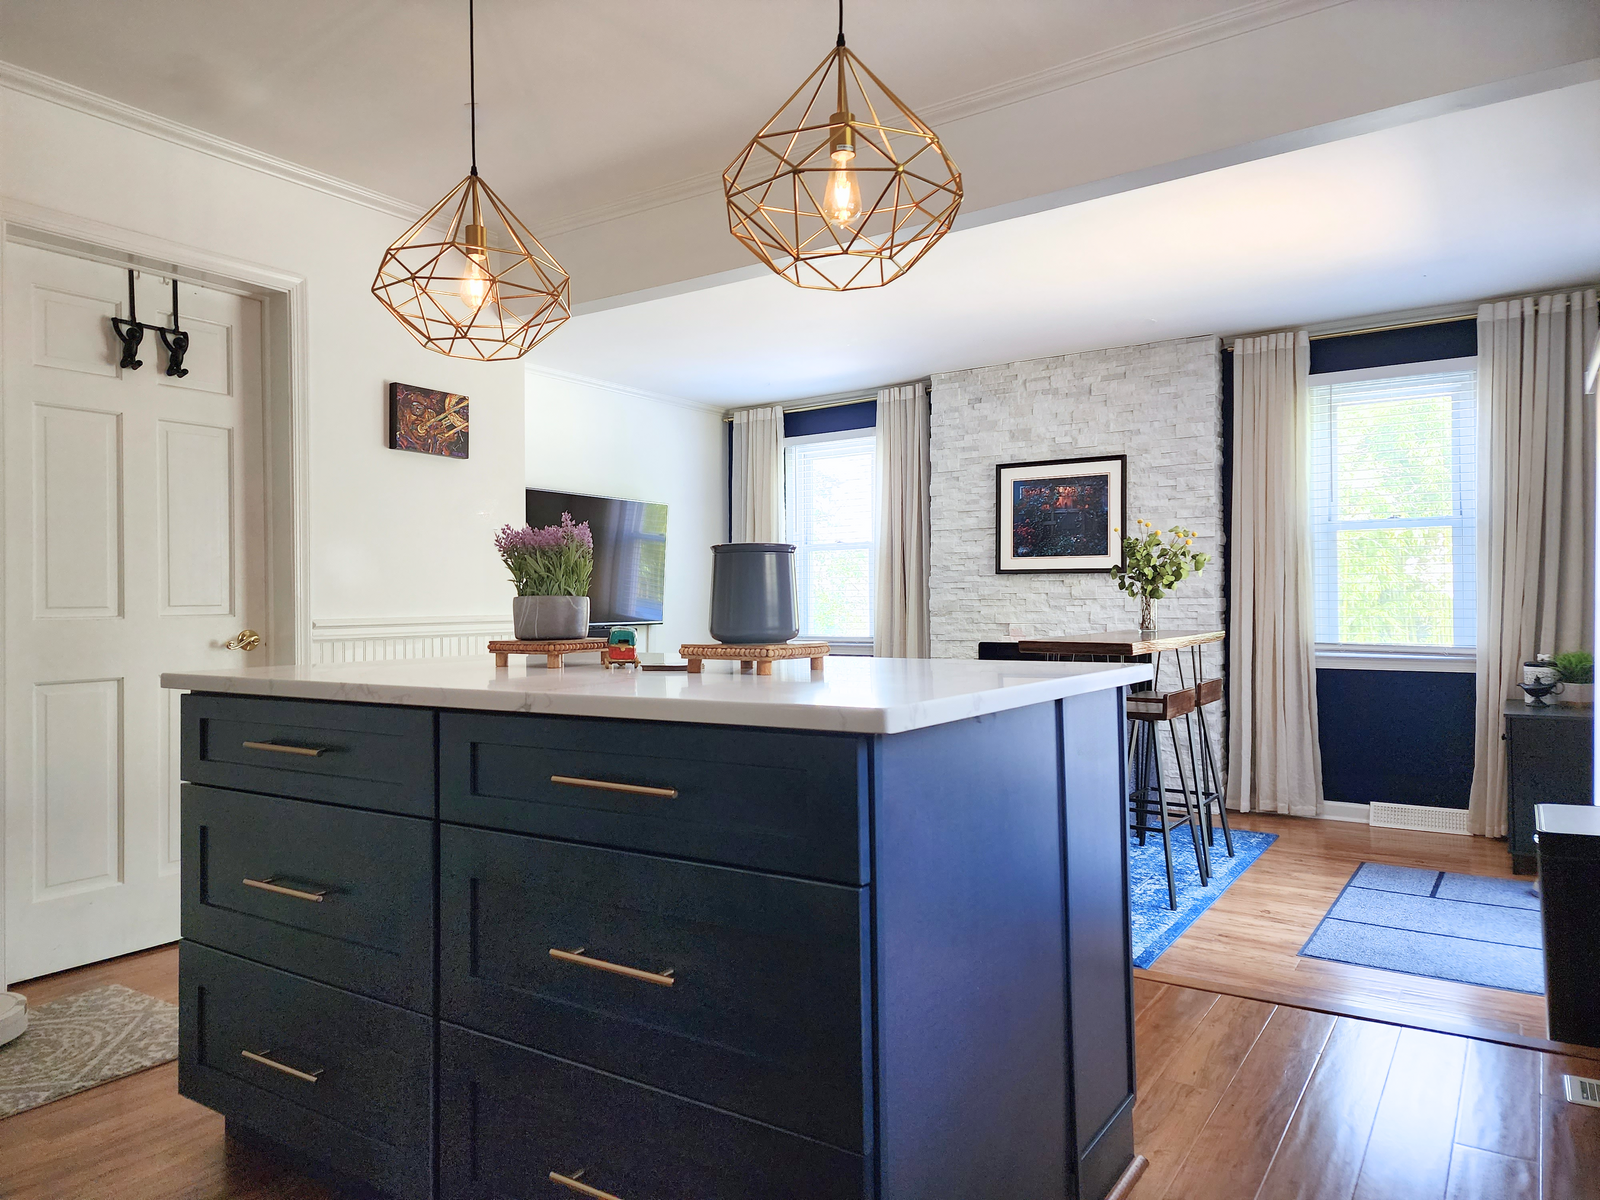 blue and beige kitchen with gold and matte black accents and a beautiful wood grain floors design by bespoke by ali fasi main line philadelpha